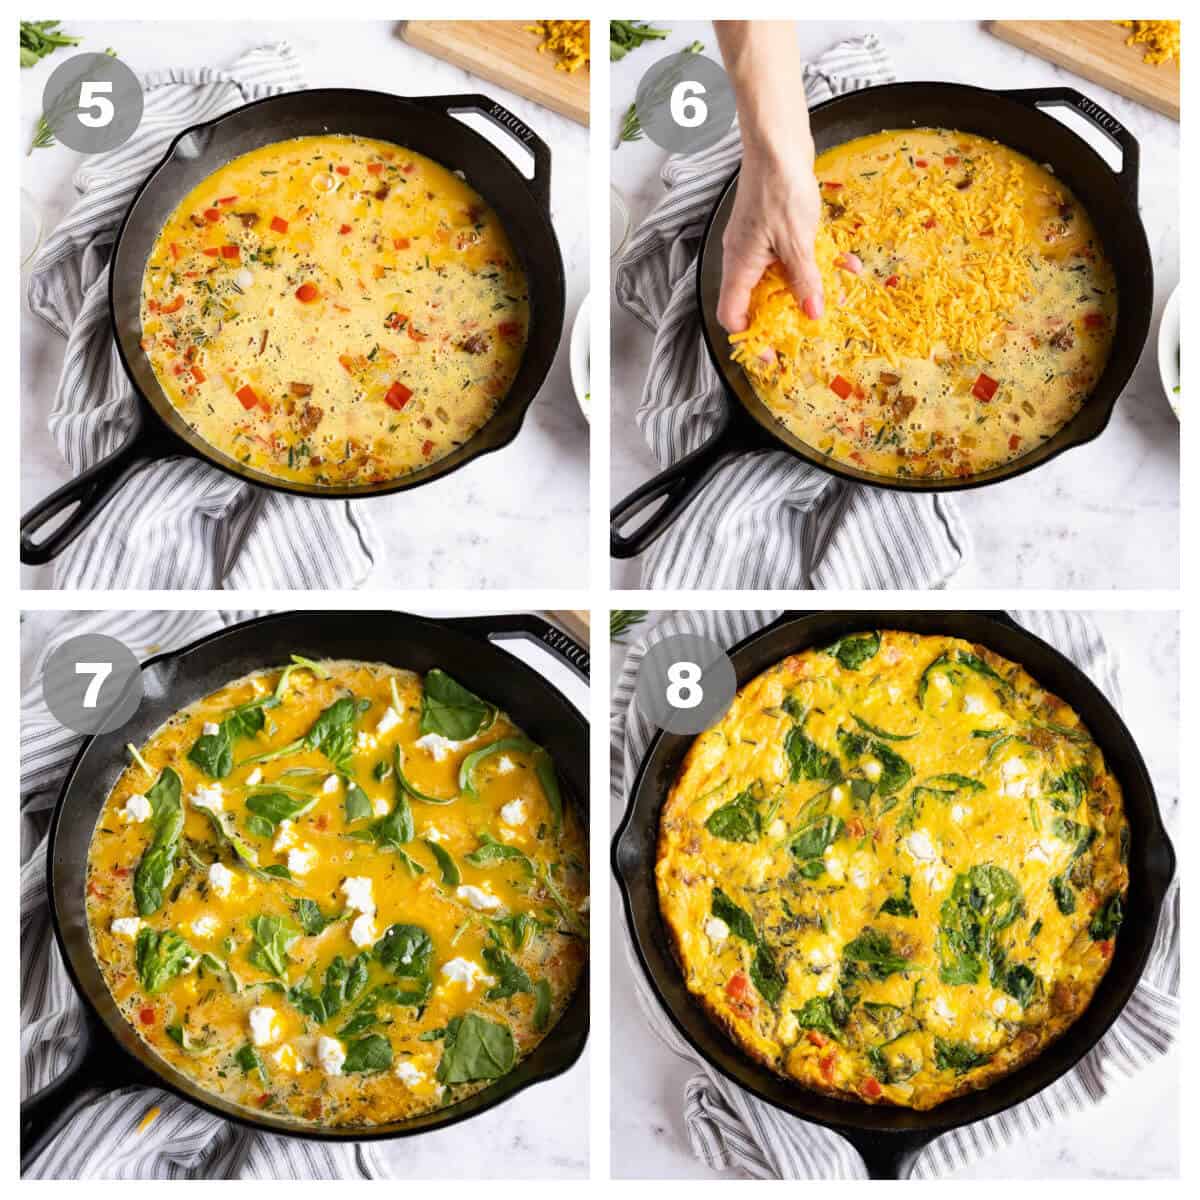 collage of 4 photos showing steps 5-8 of making a frittata